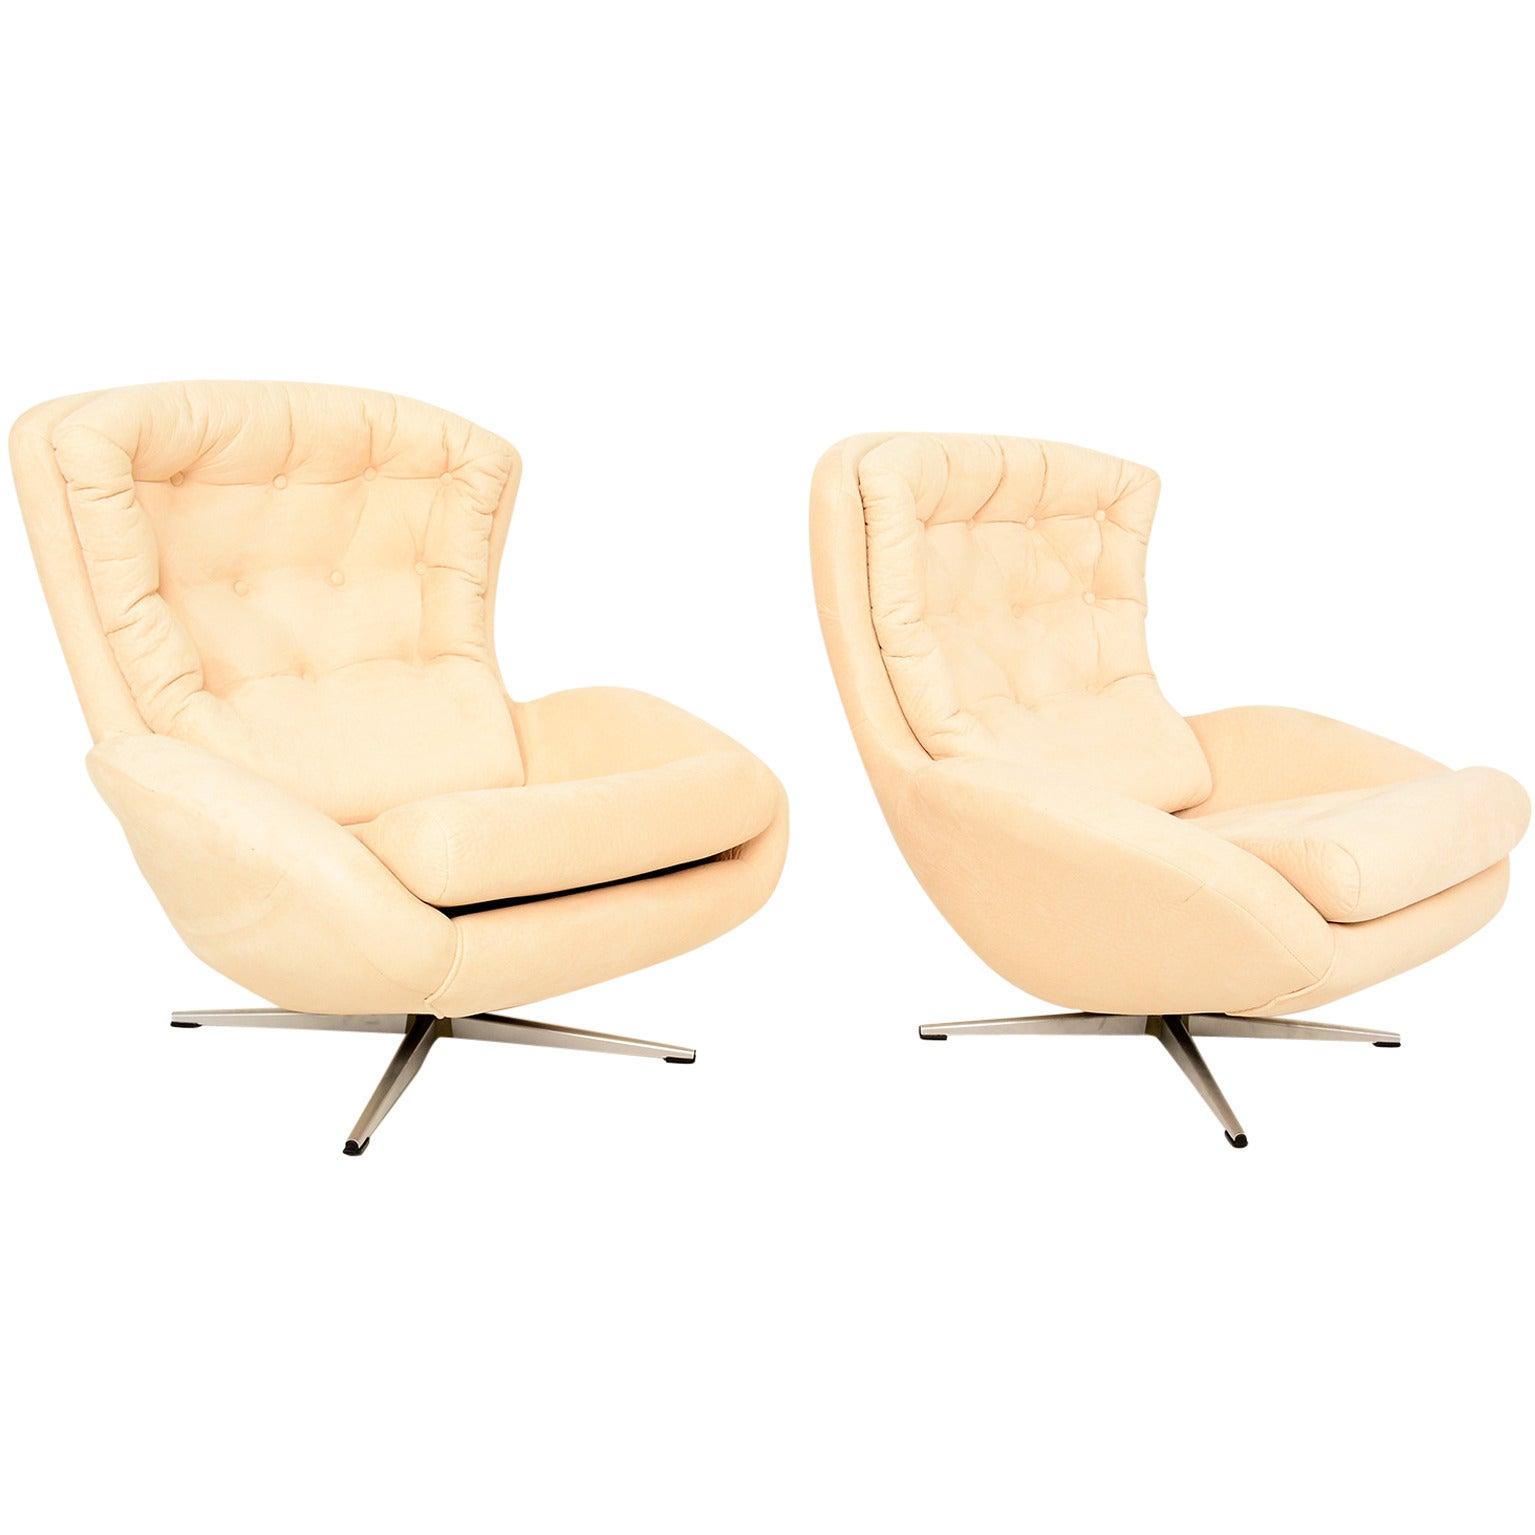 Contura Mobler Sweden Lounge Chairs